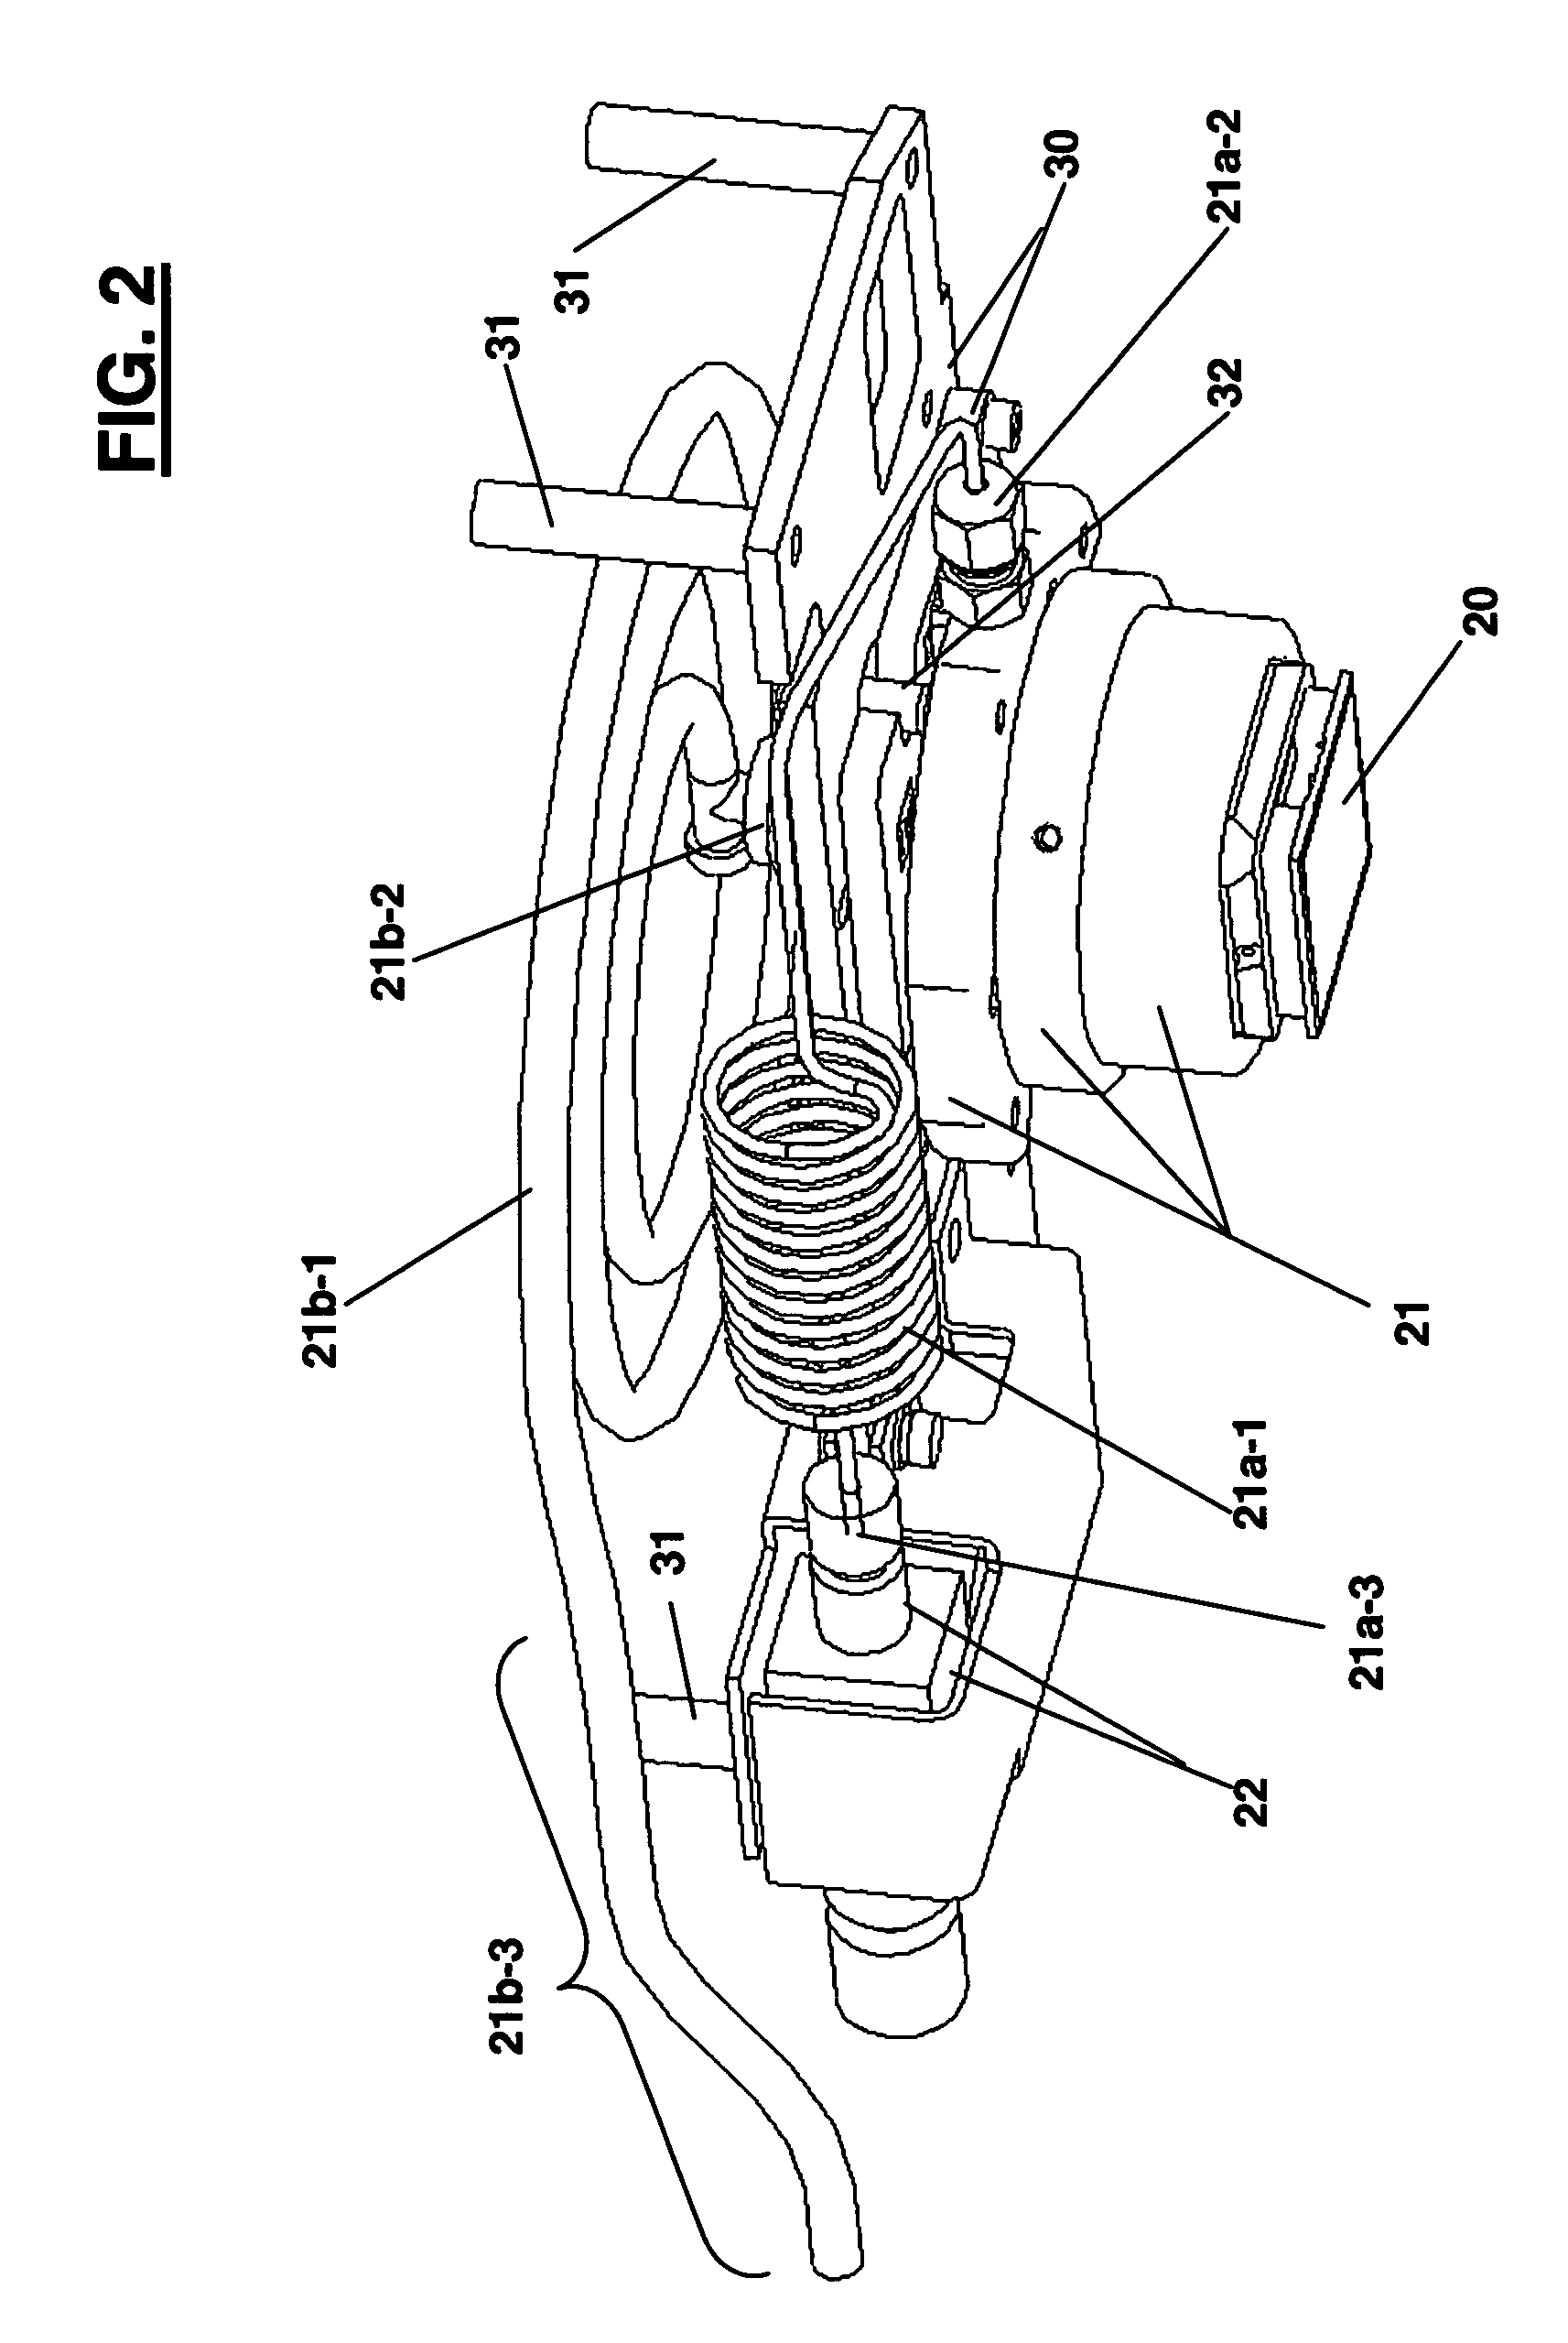 Mechanical assembly, for regulating the temperature of an IC-Chip, having a gimbaled heat-exchanger with coiled springy conduits